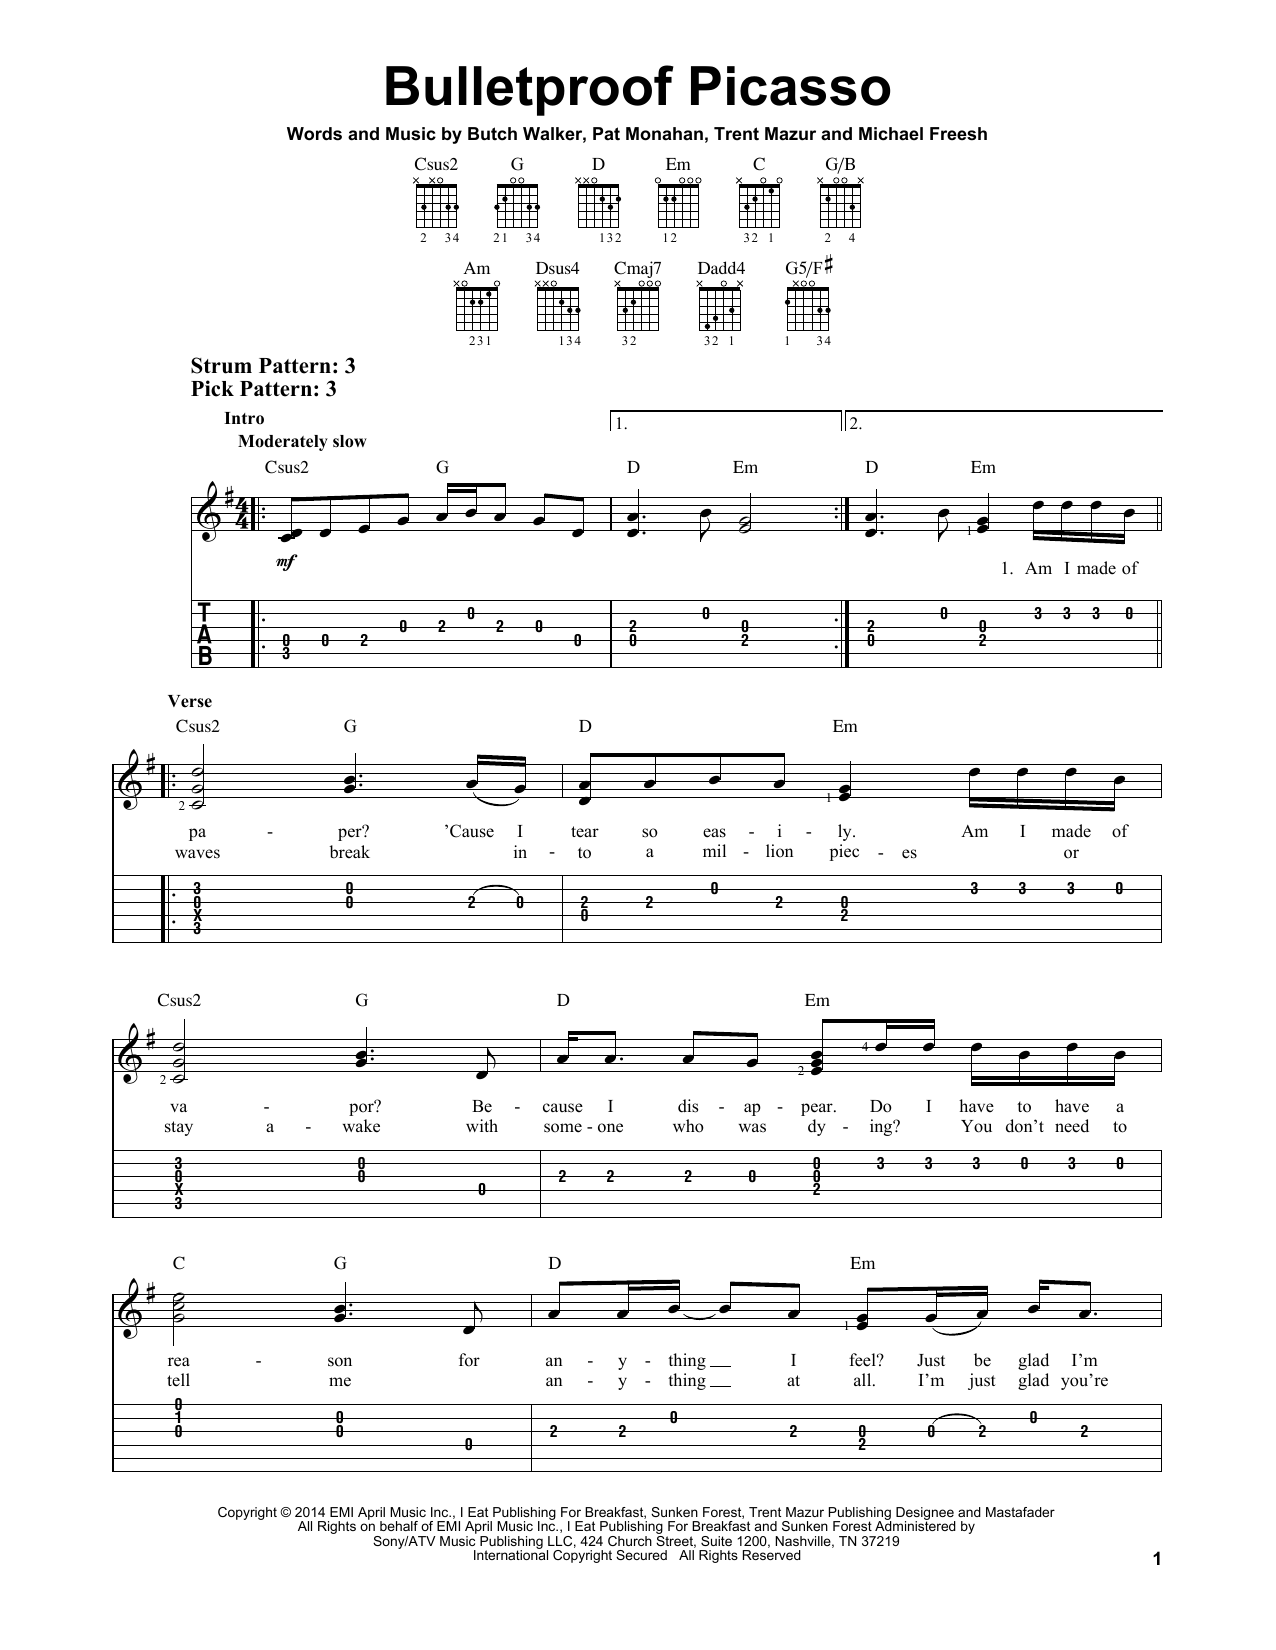 Download Train Bulletproof Picasso Sheet Music